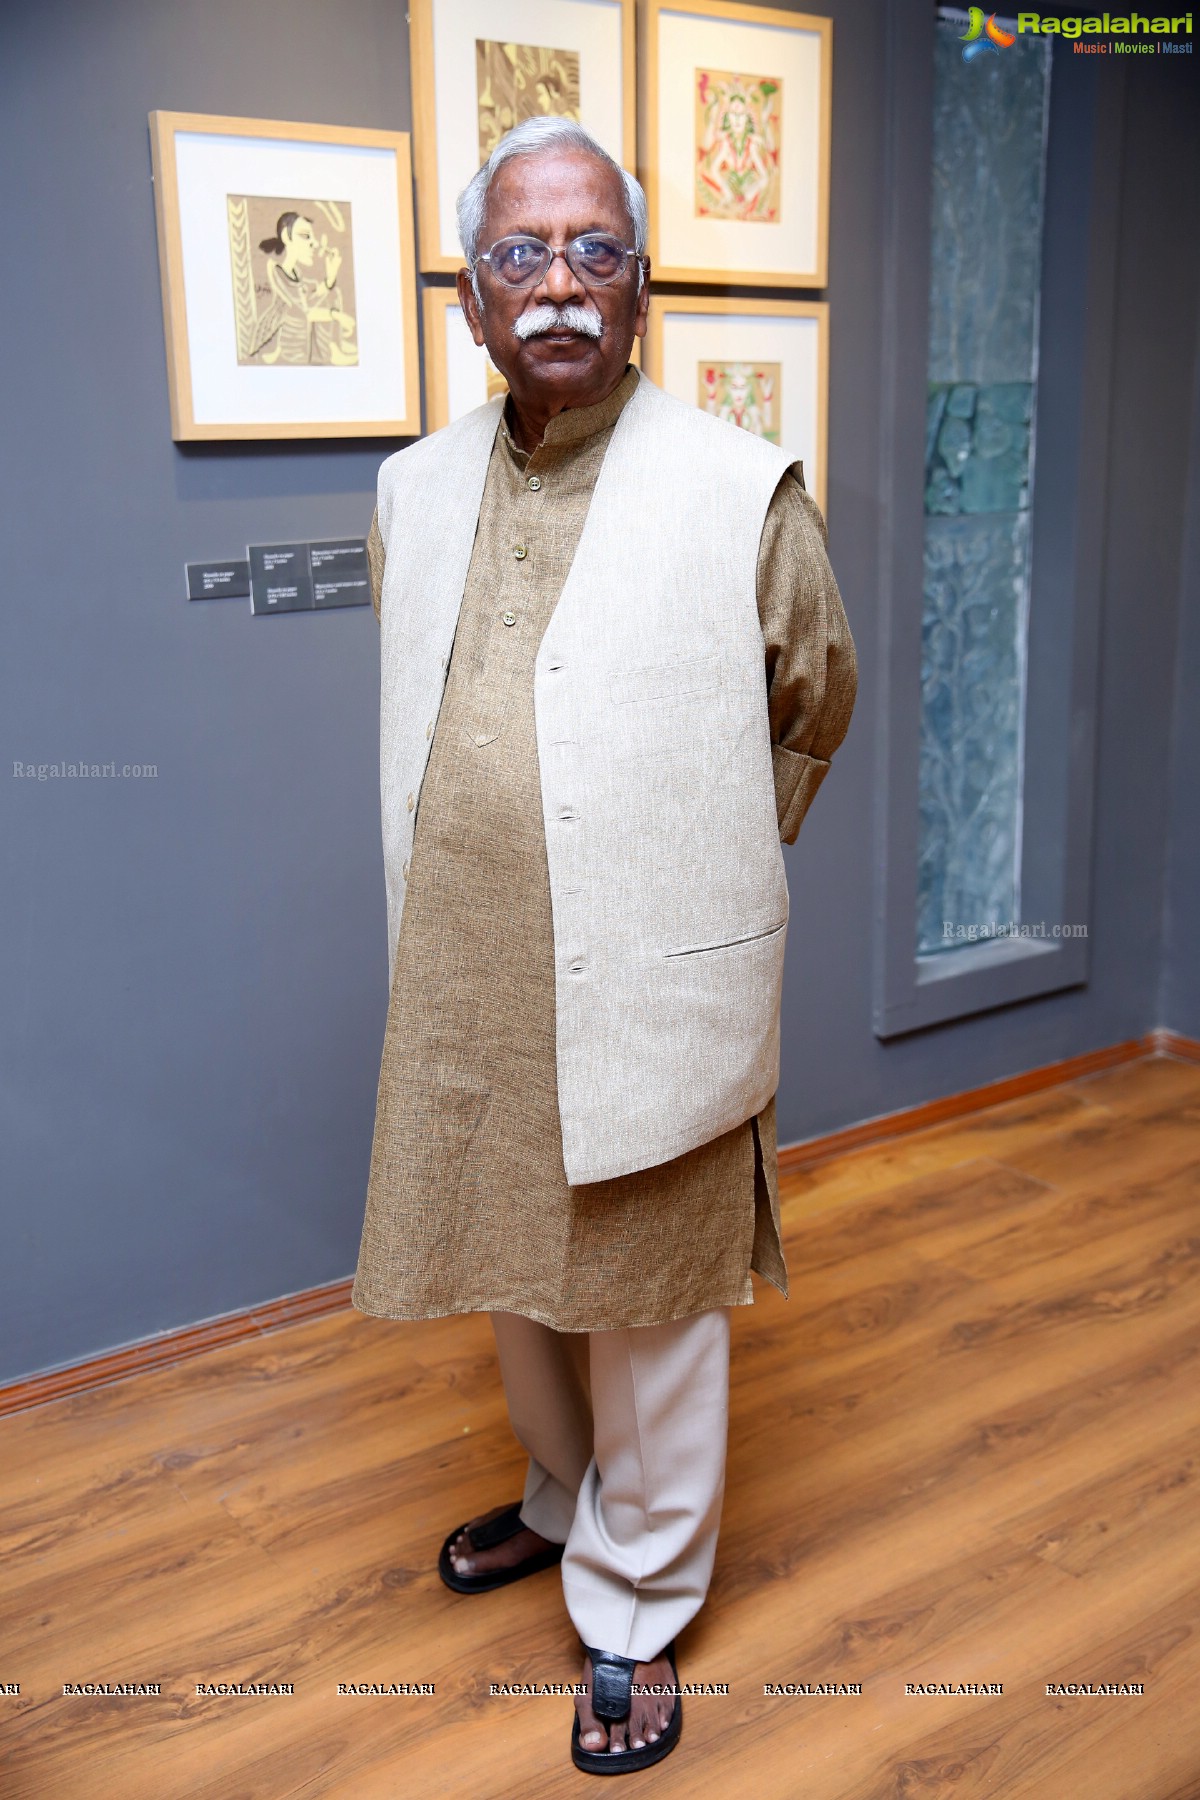 Moving Focus - A Voyage With KG Subramanyan by Seagull Foundation for The Arts @ Kalakriti Art Gallery